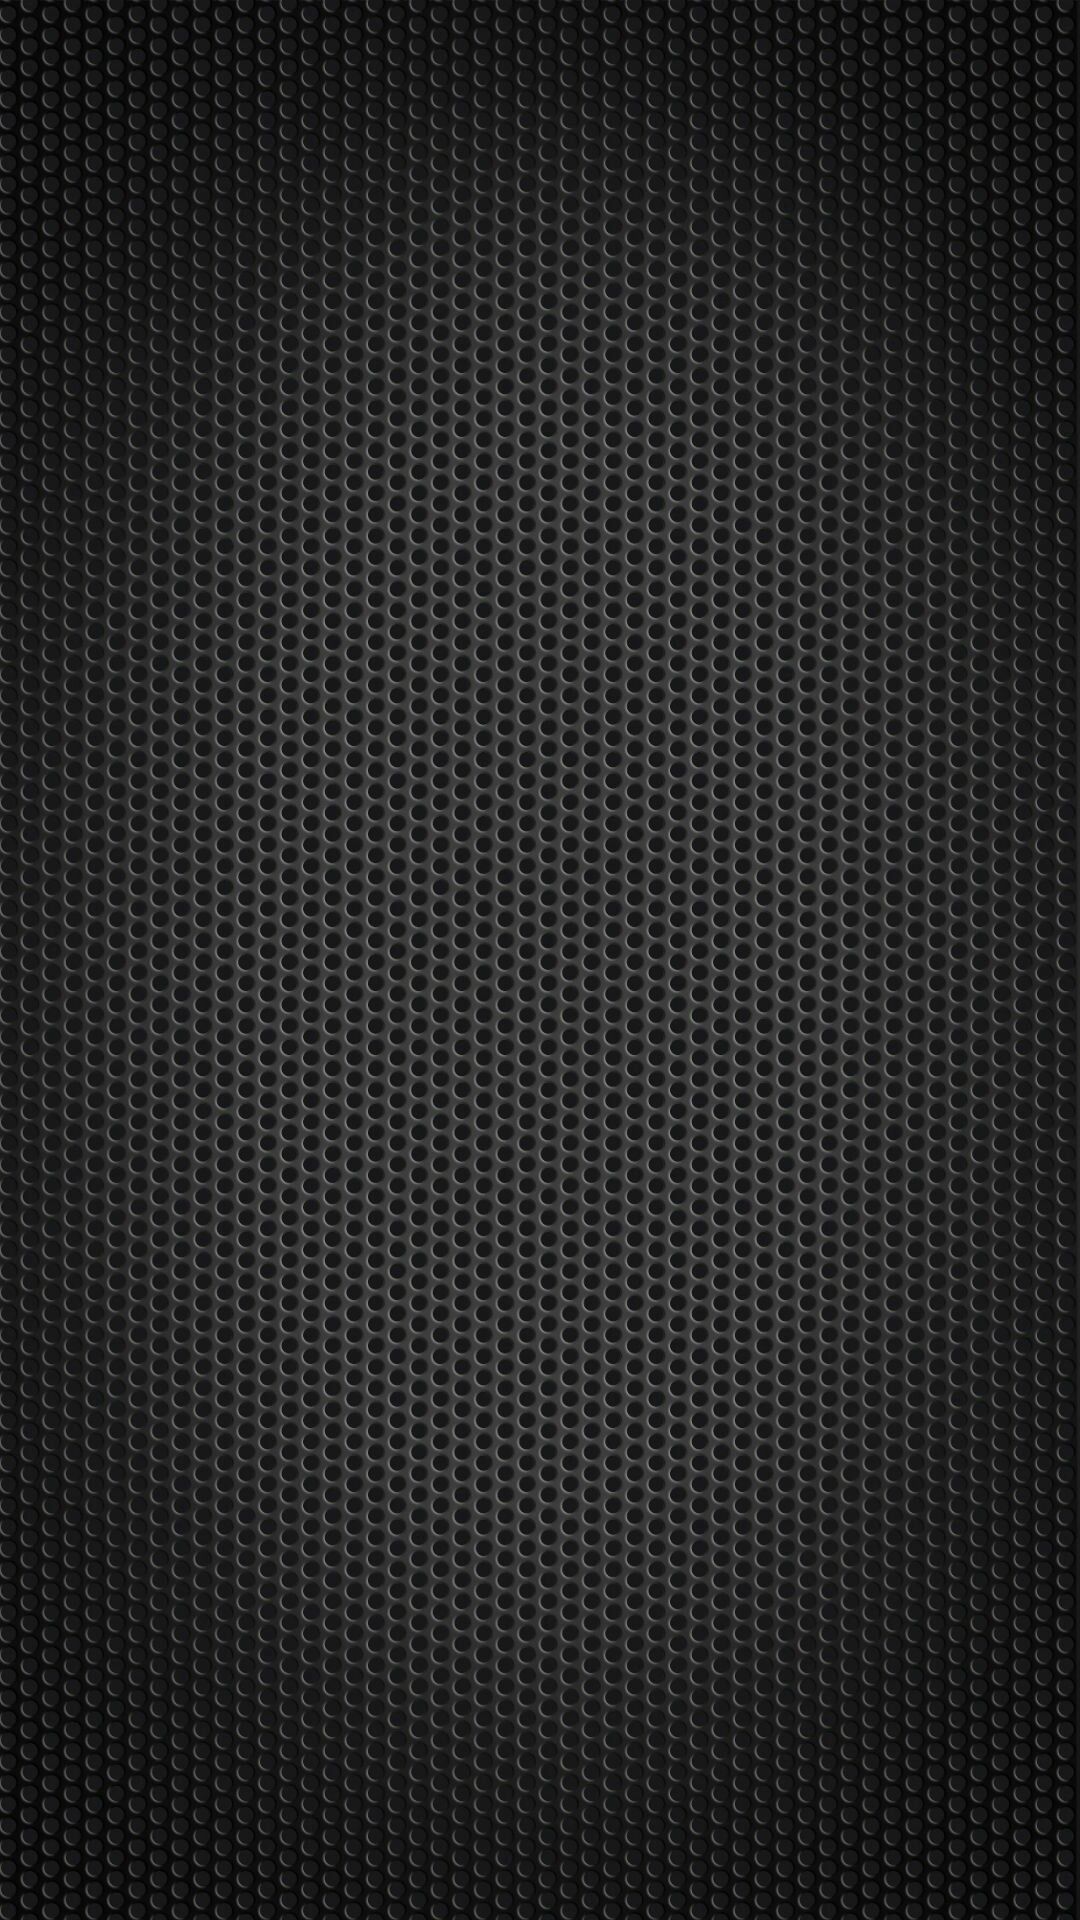 MuchaTseBle. Abstract wallpaper background, Phone wallpaper design, Black phone wallpaper